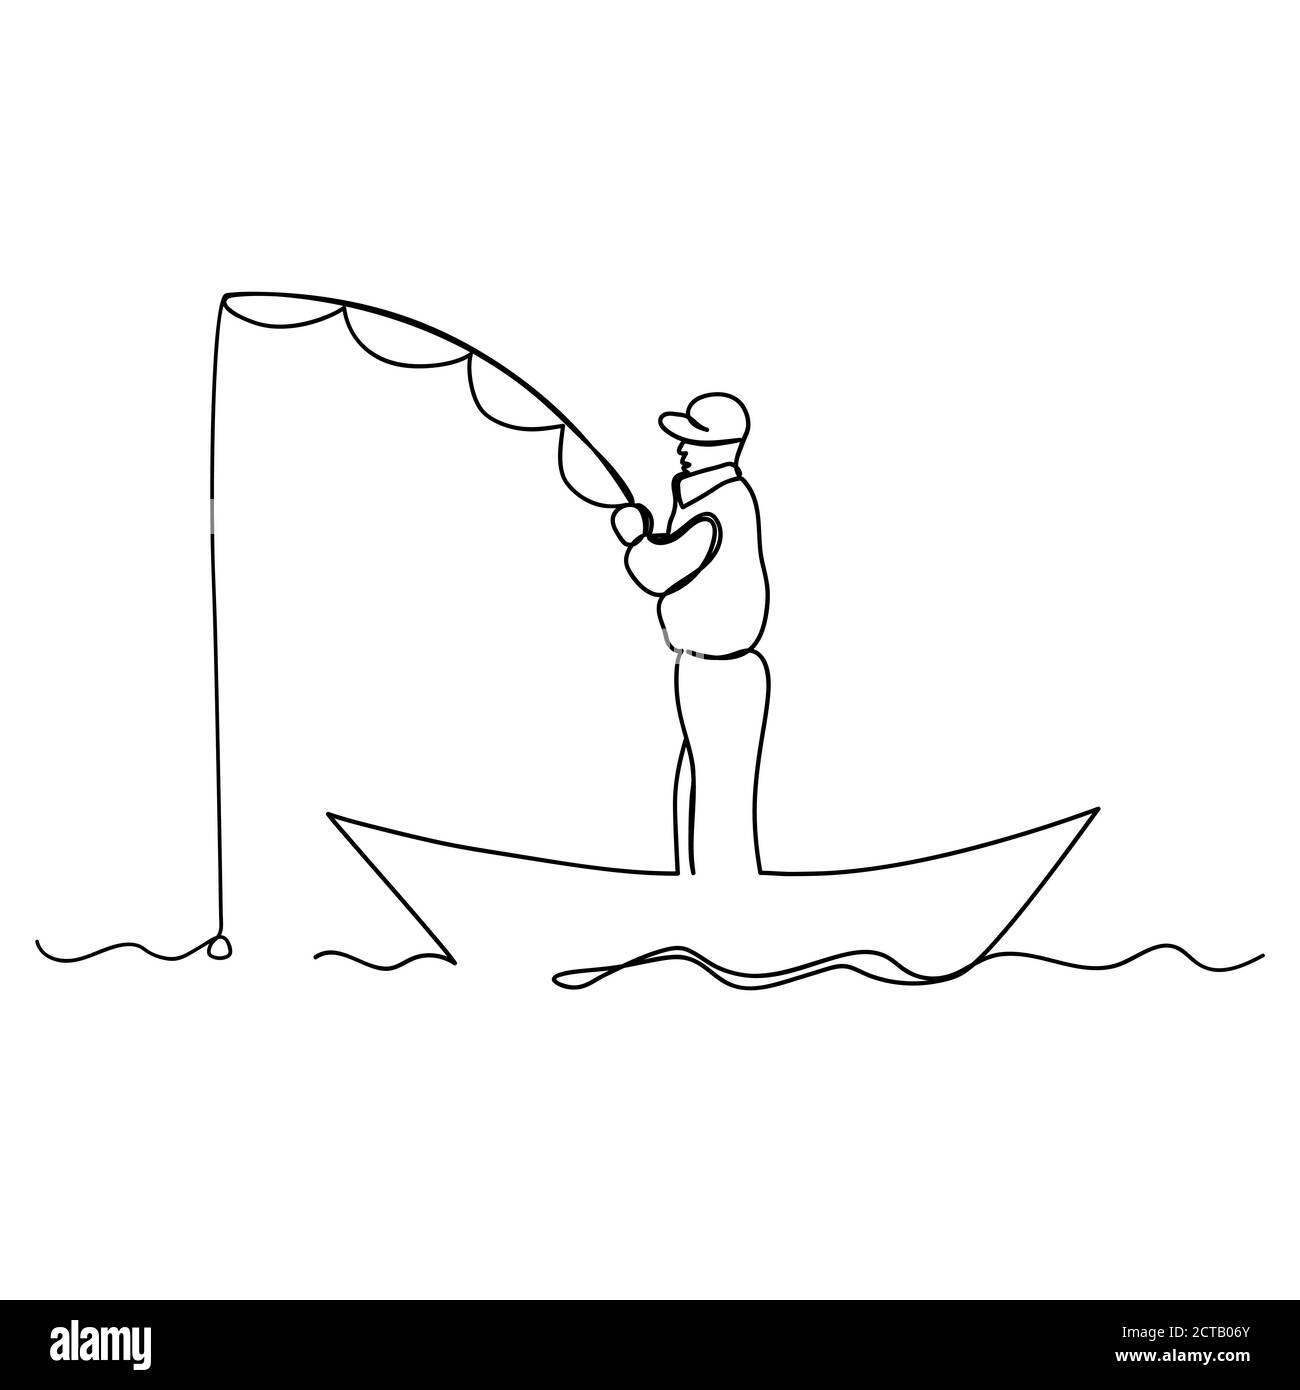 Man fishing from a boat. Line art Stock Vector